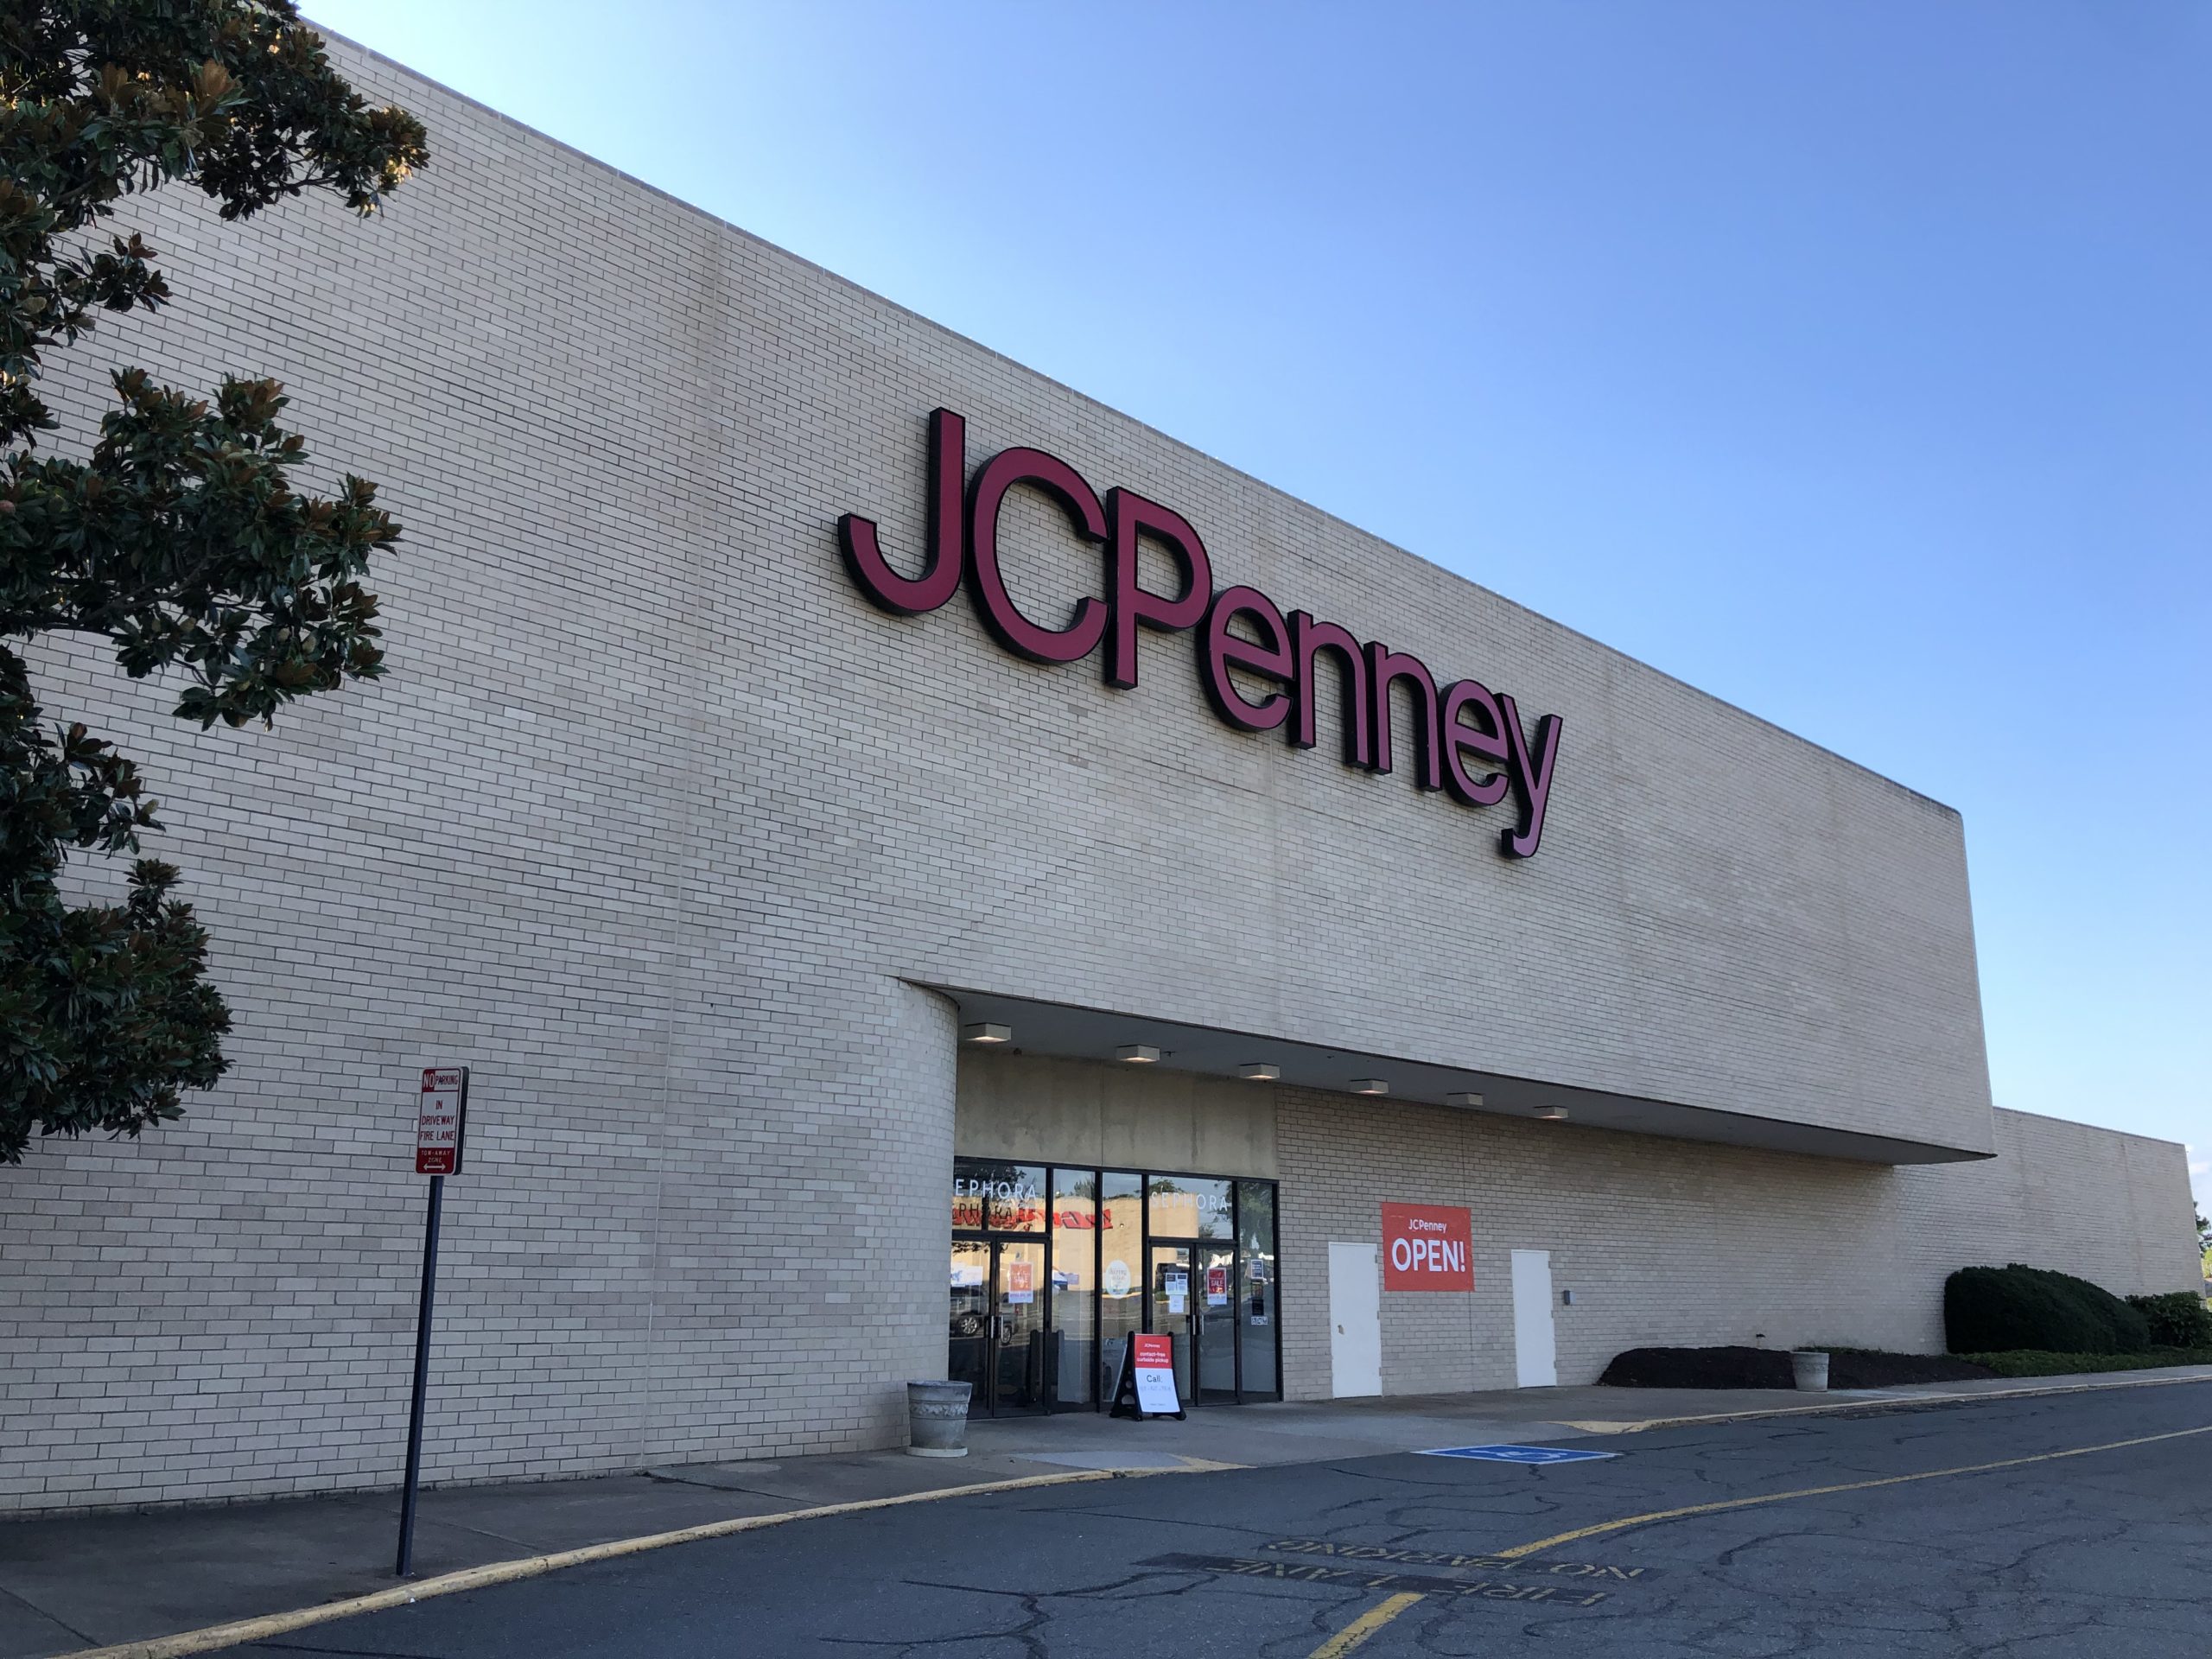 Sephora to open a store within University Mall JCPenny